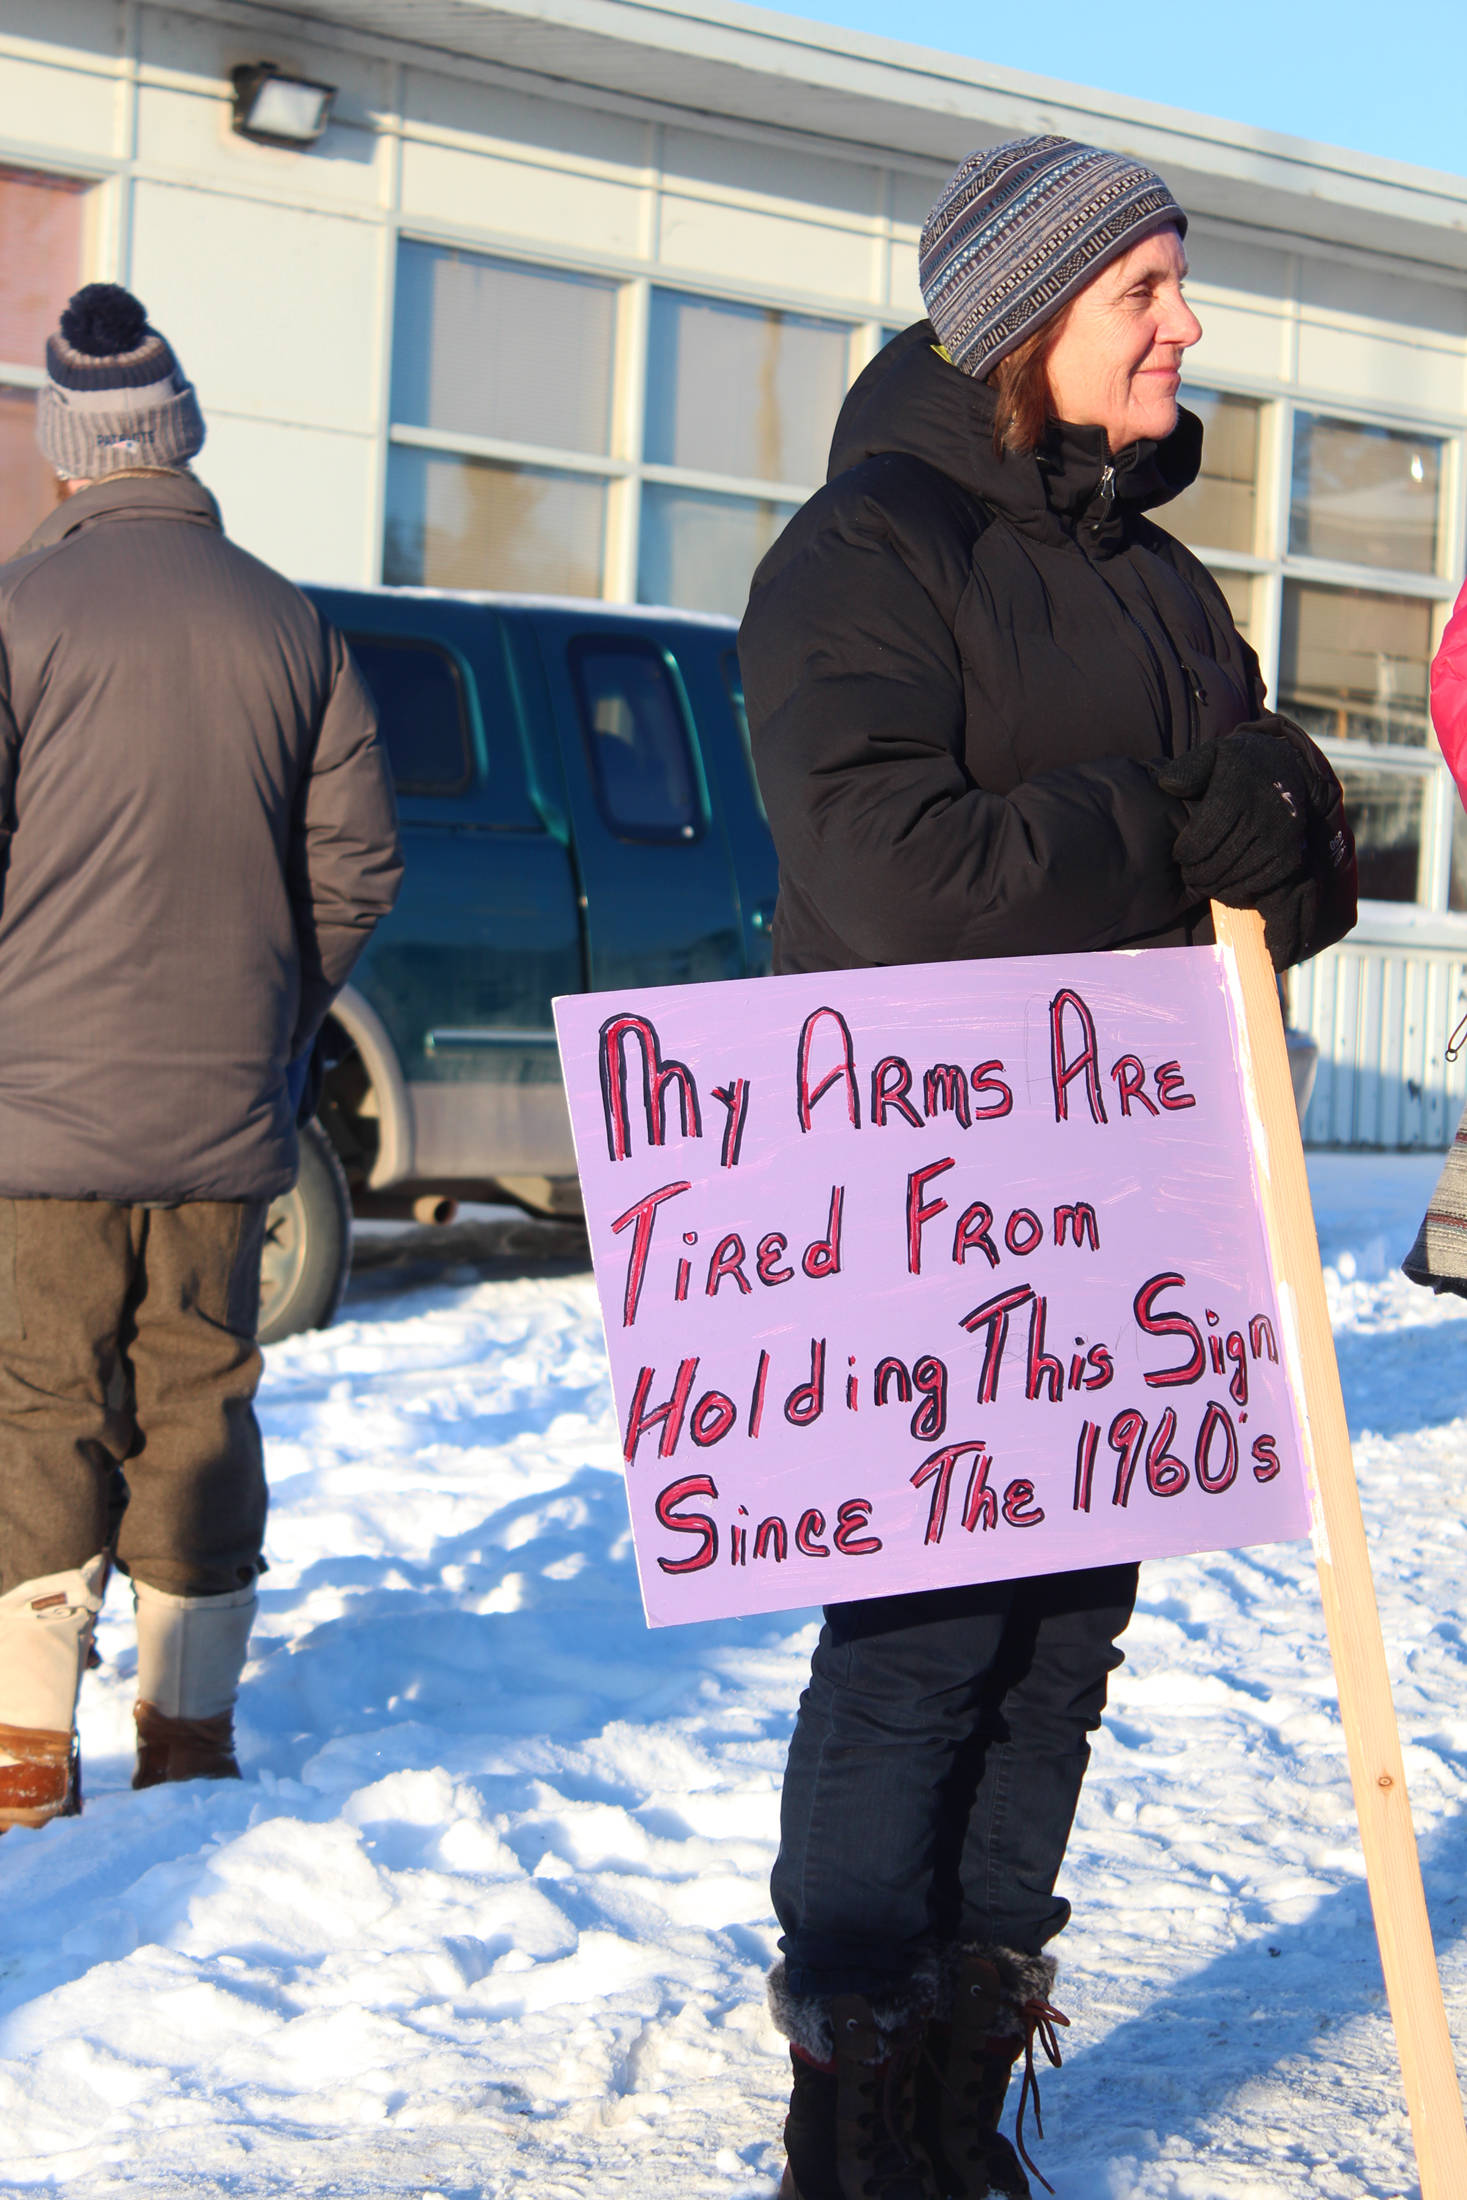 A woman holds a sign that reads “My arms are tired from holding this sign since the 1960s” beforfe the fourth Women’s March on Homer on Saturday, Jan. 18, 2020 in Homer, Alaska. About 300 community members gathered outside the Homer Education and Recreation Complex before marching down Pioneer Avenue to WKFL Park. (Photo by Megan Pacer/Homer News)